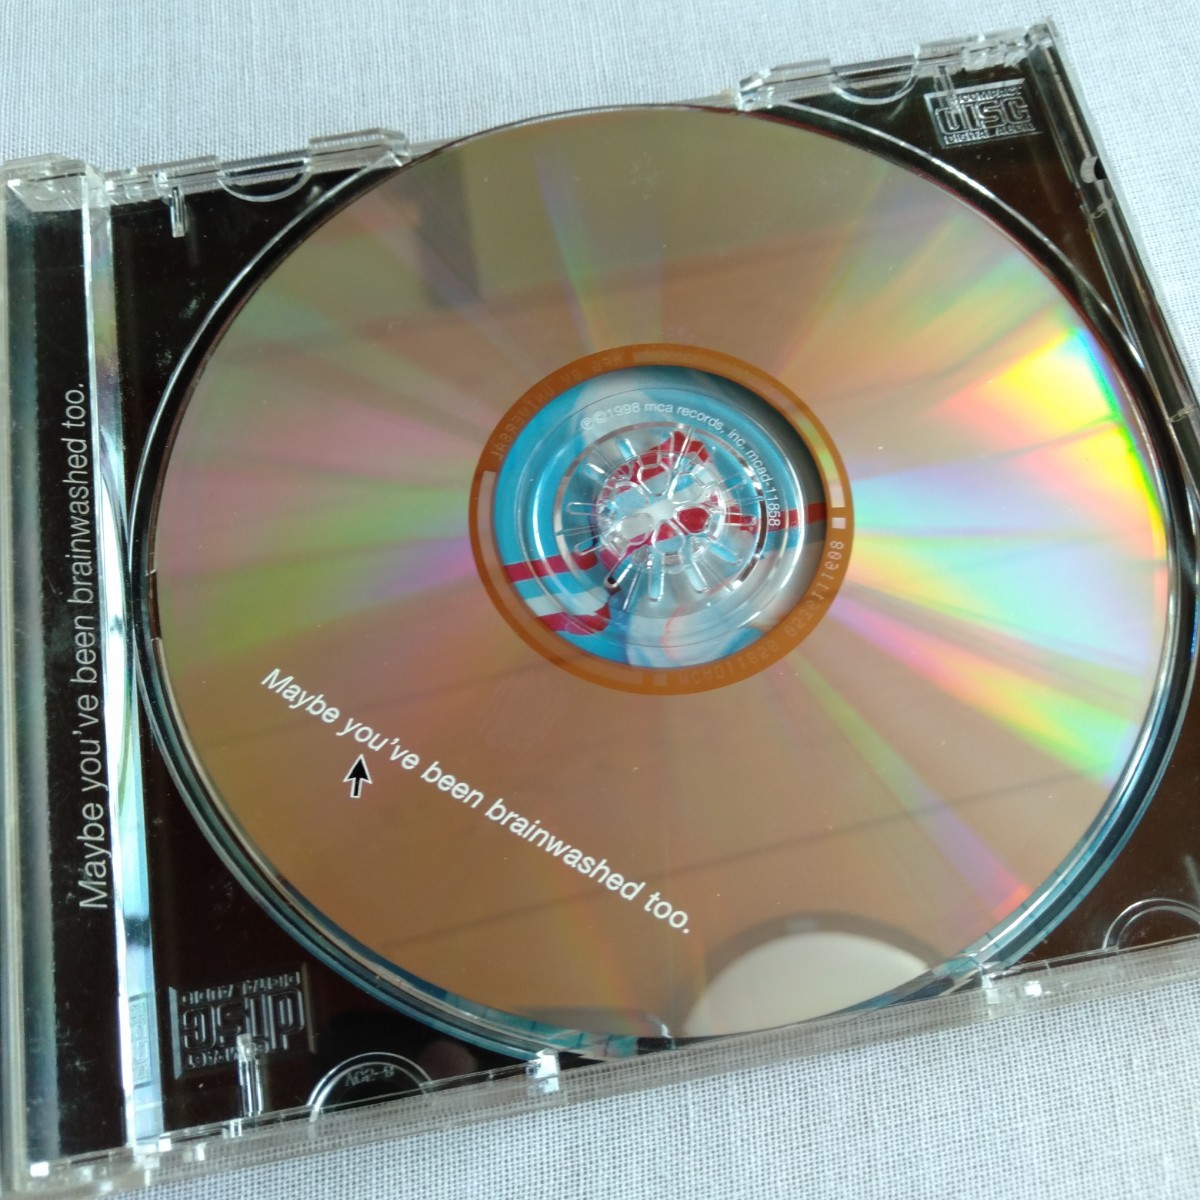 S077 ニュー・ラディカルズ New Radicals Maybe you've been brainwashed too. CD ケース状態A _画像4